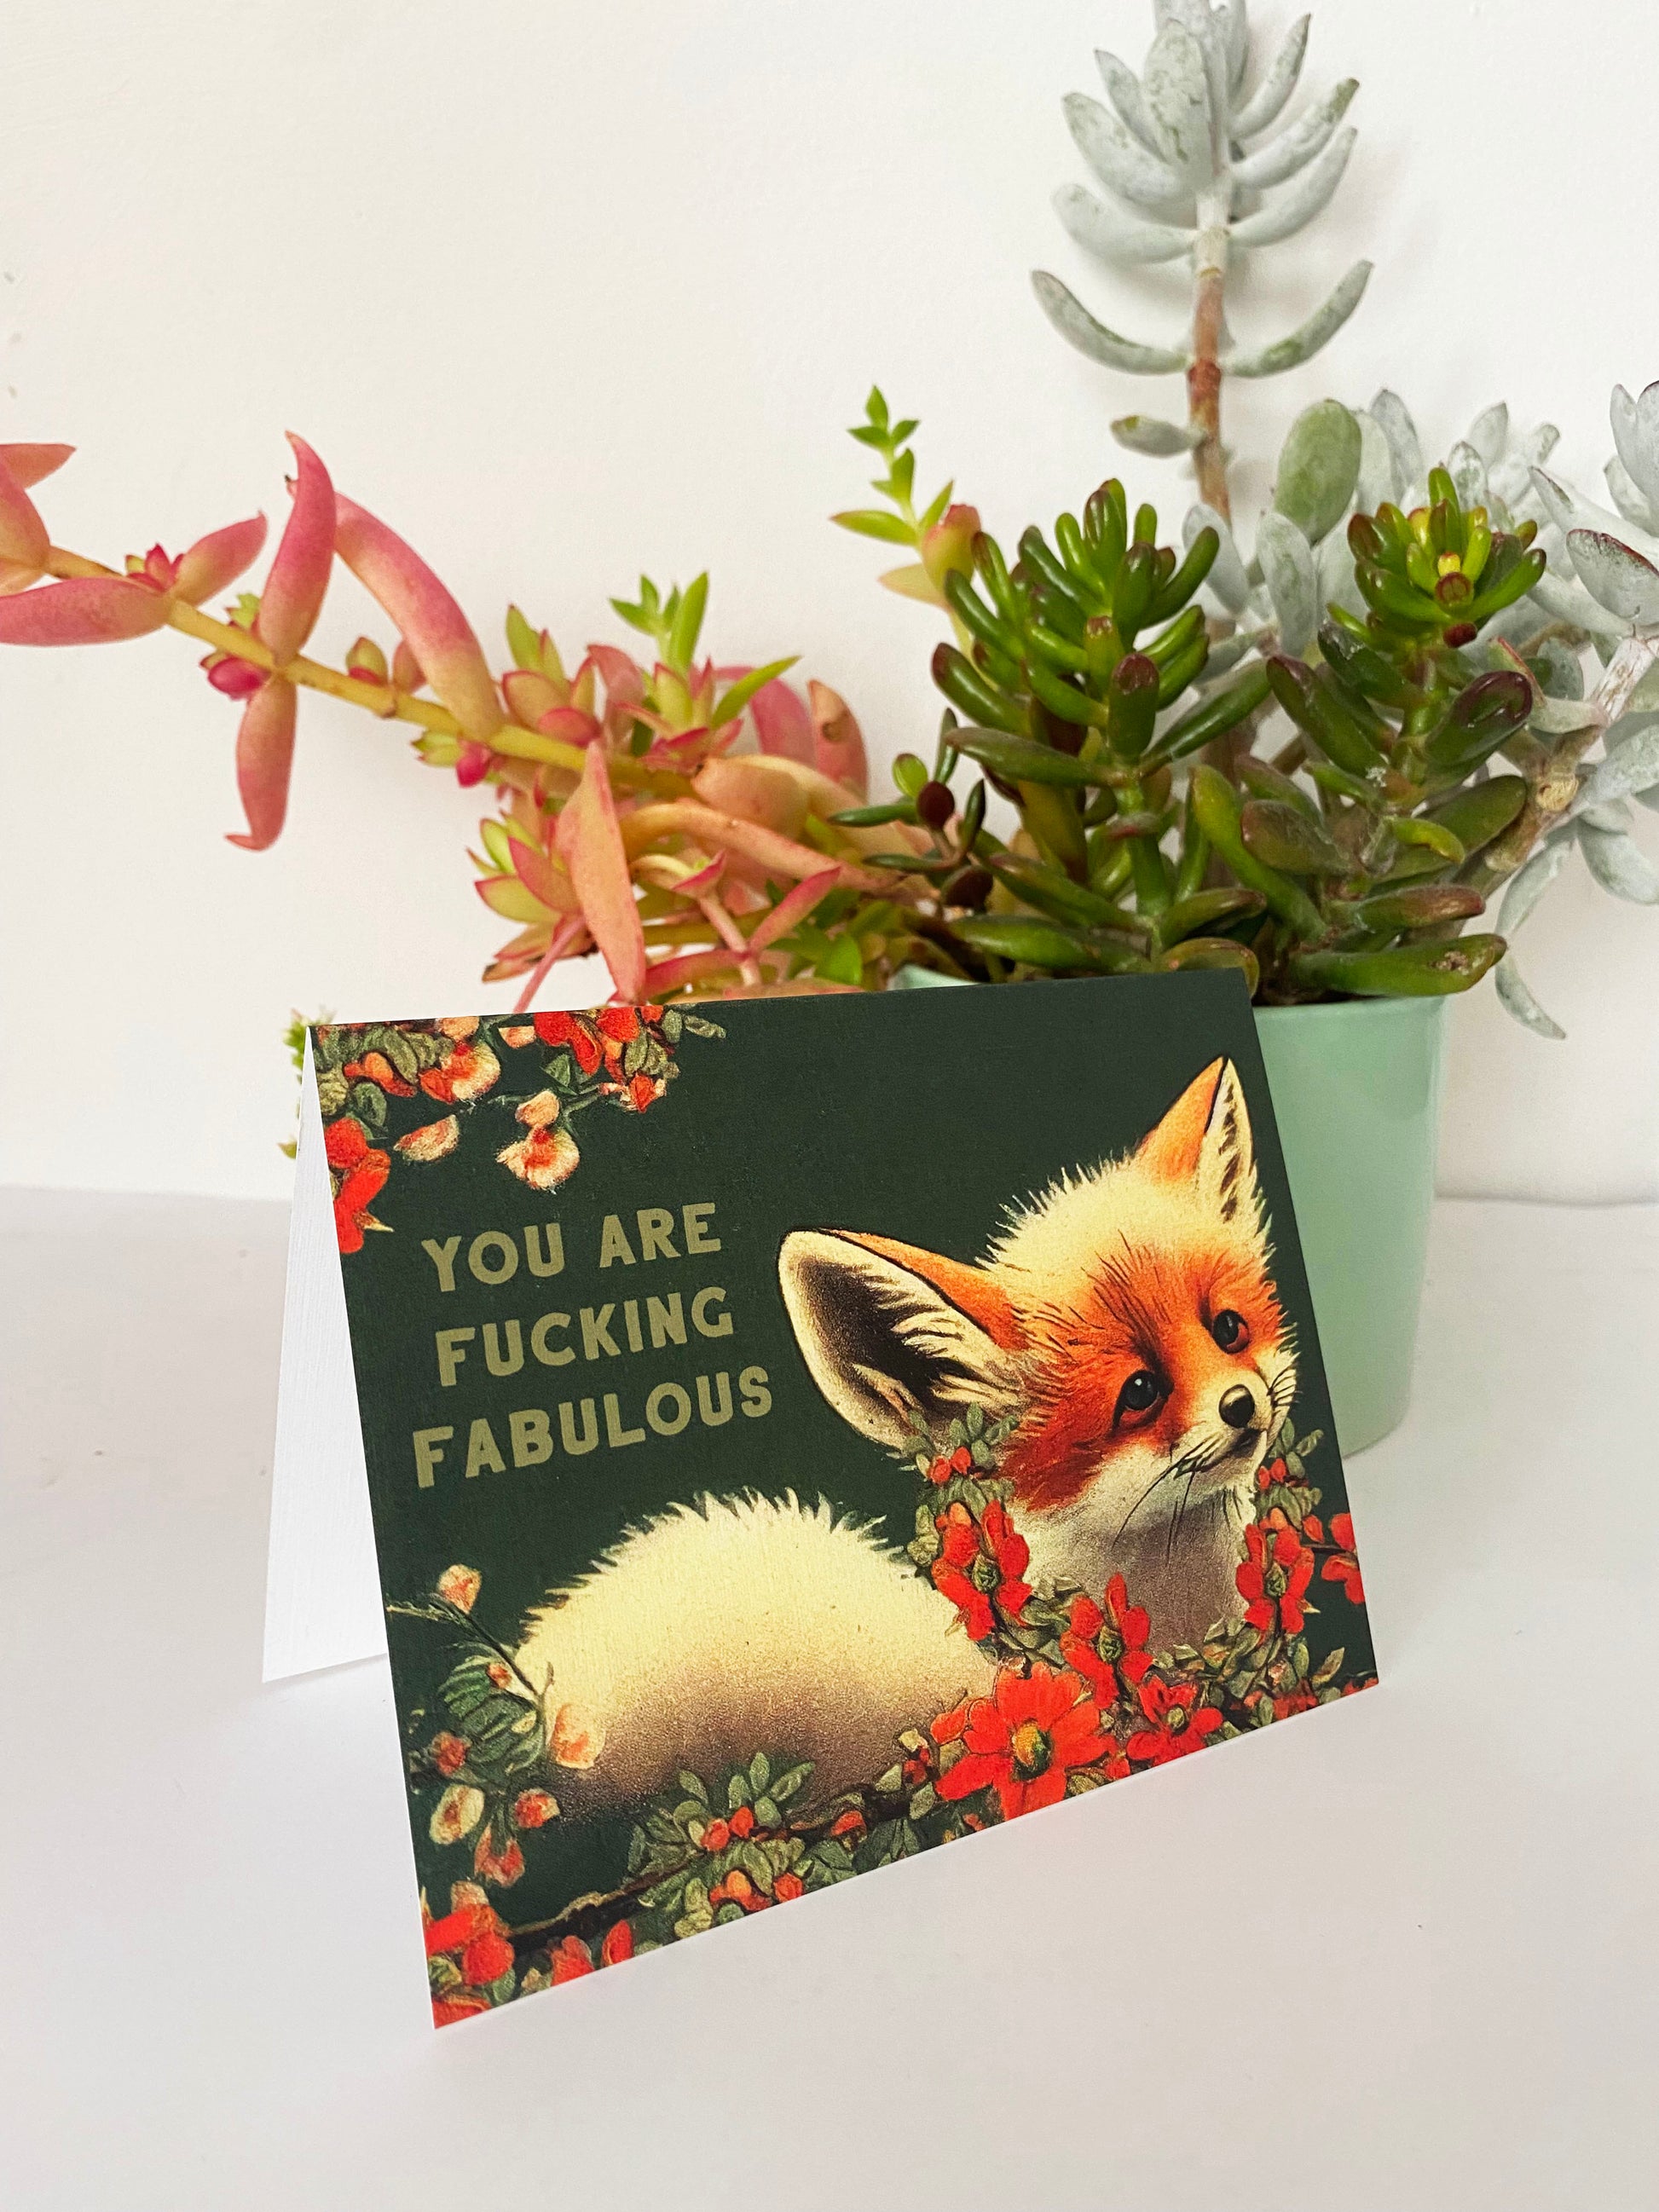 dark green red flowers cute adorable vintage fox all purpose note card fun funny snarky you are fucking fabulous woodland animal blank inside send to anyone friend girlfriend boyfriend husband wife co-worker coin laundry